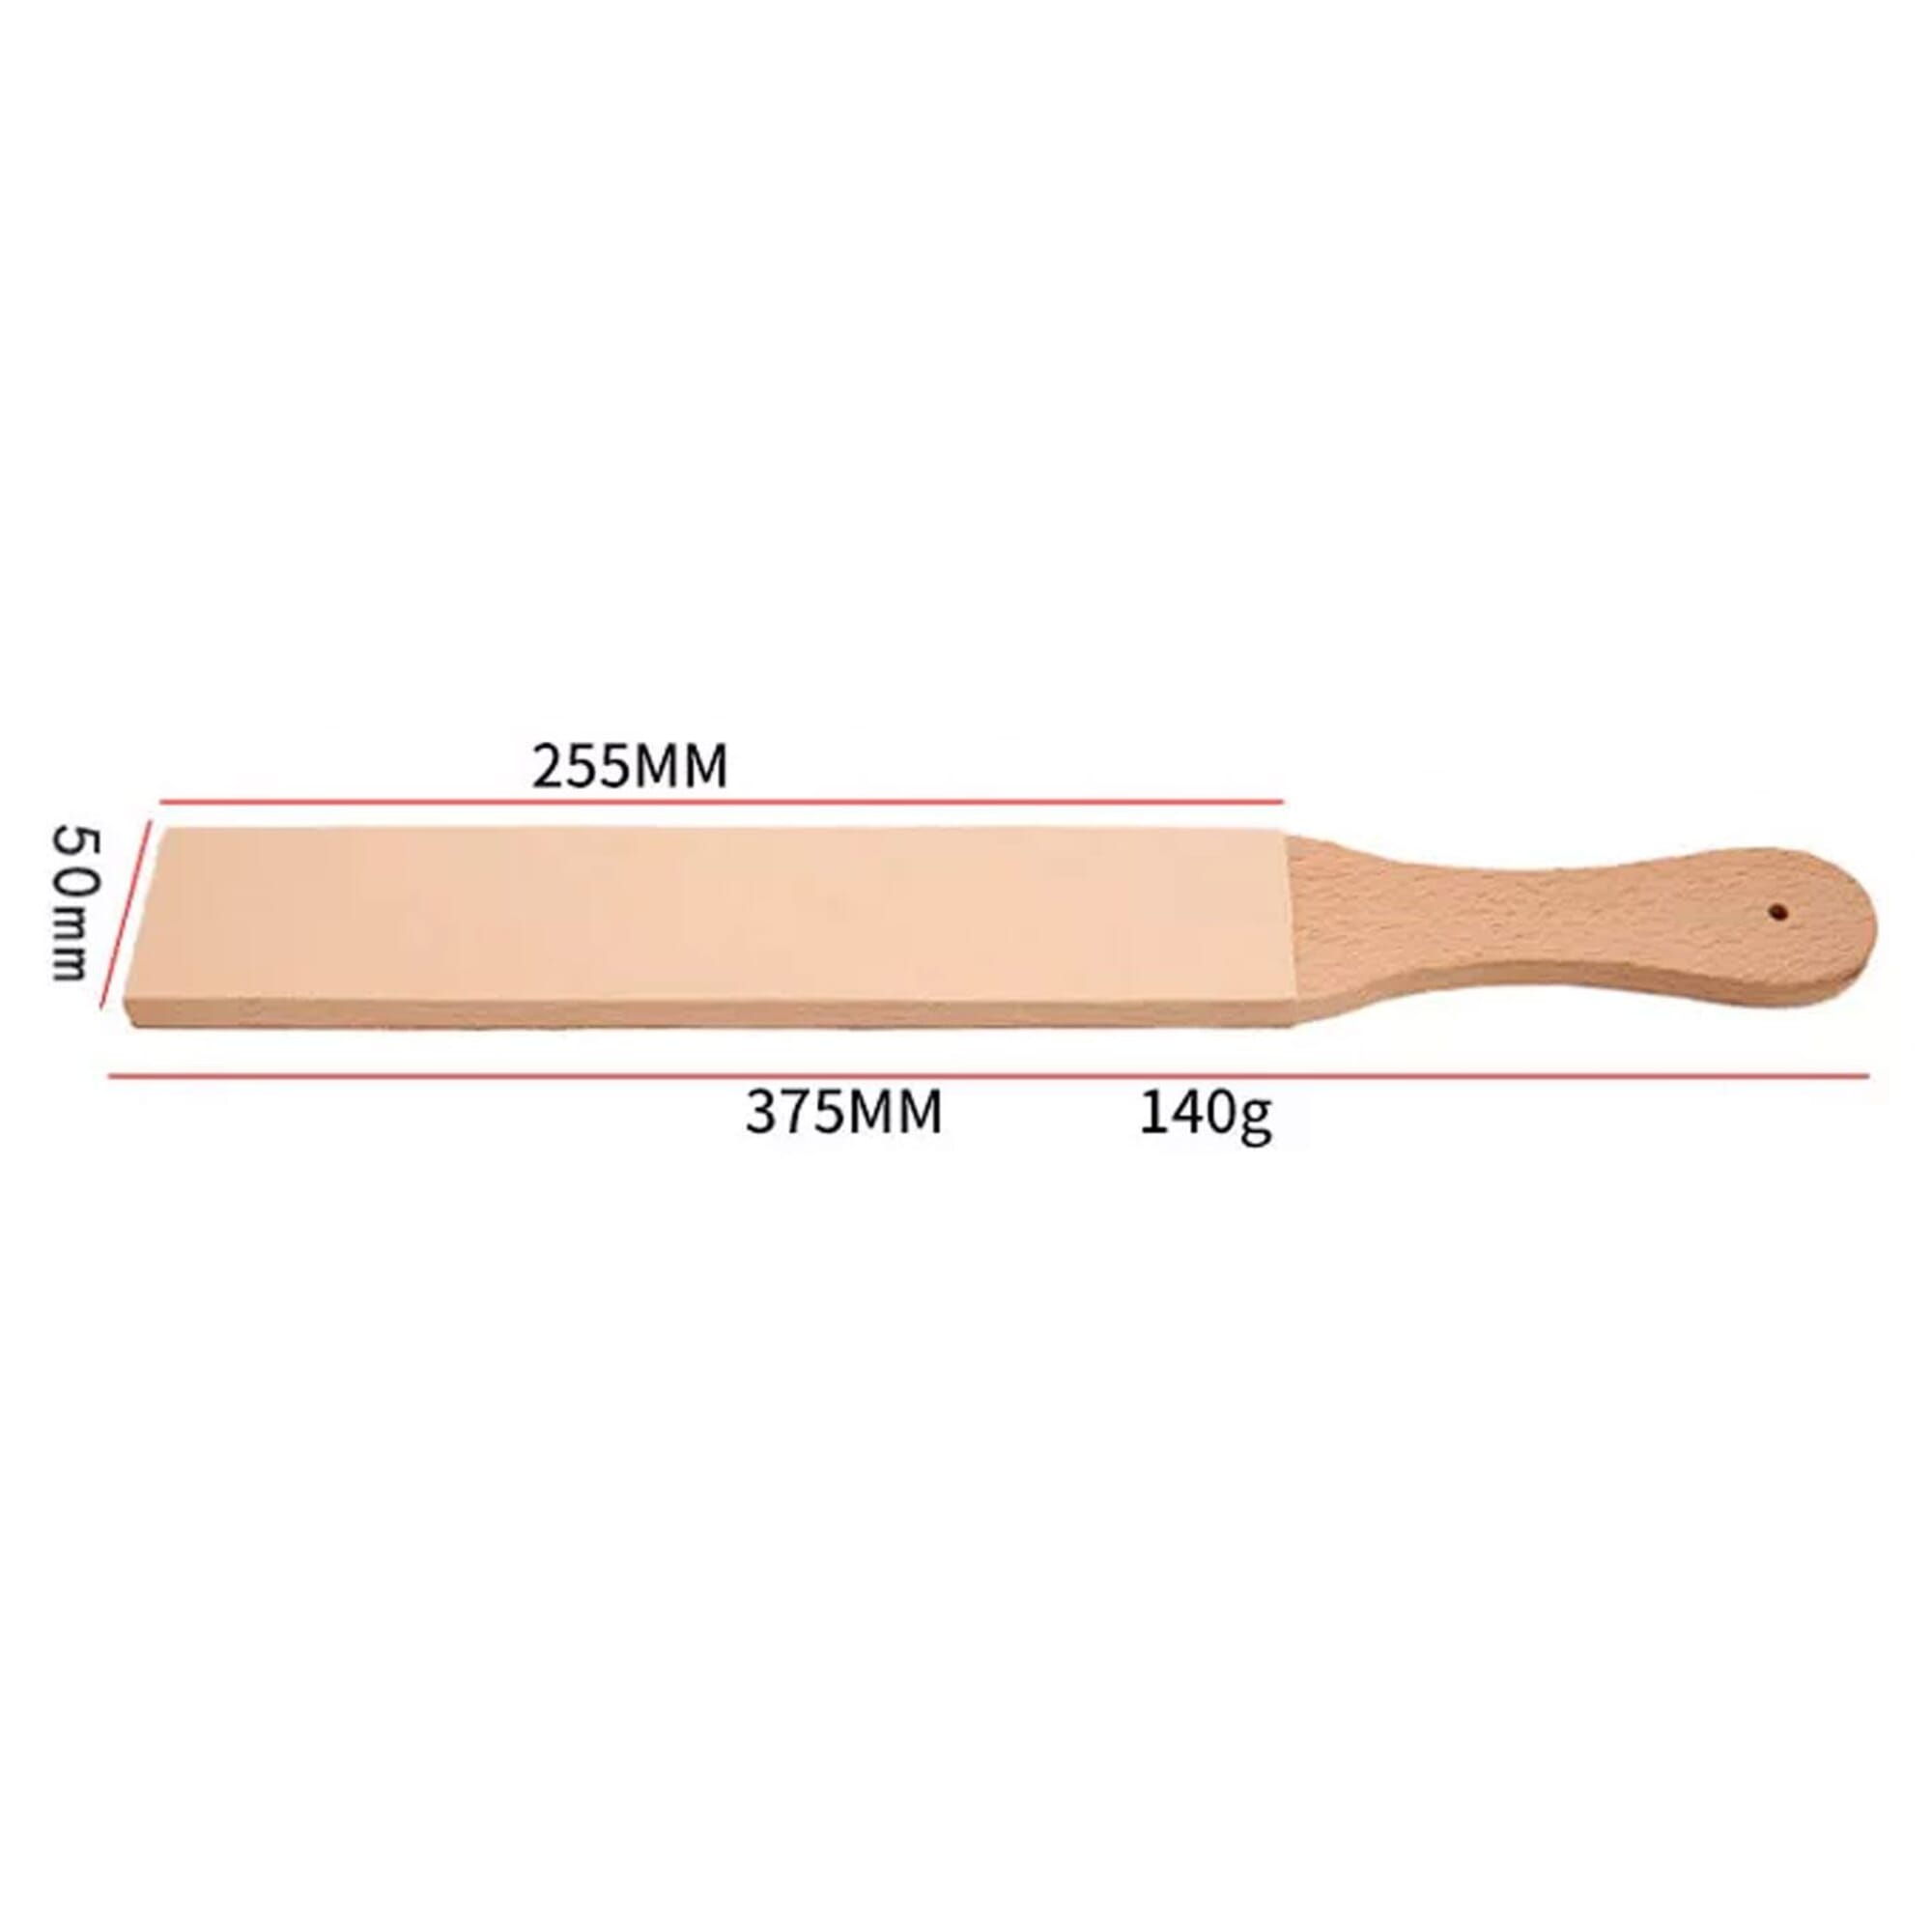 Union Razors Leather Sharpening Strop, Double Sided - SHS4